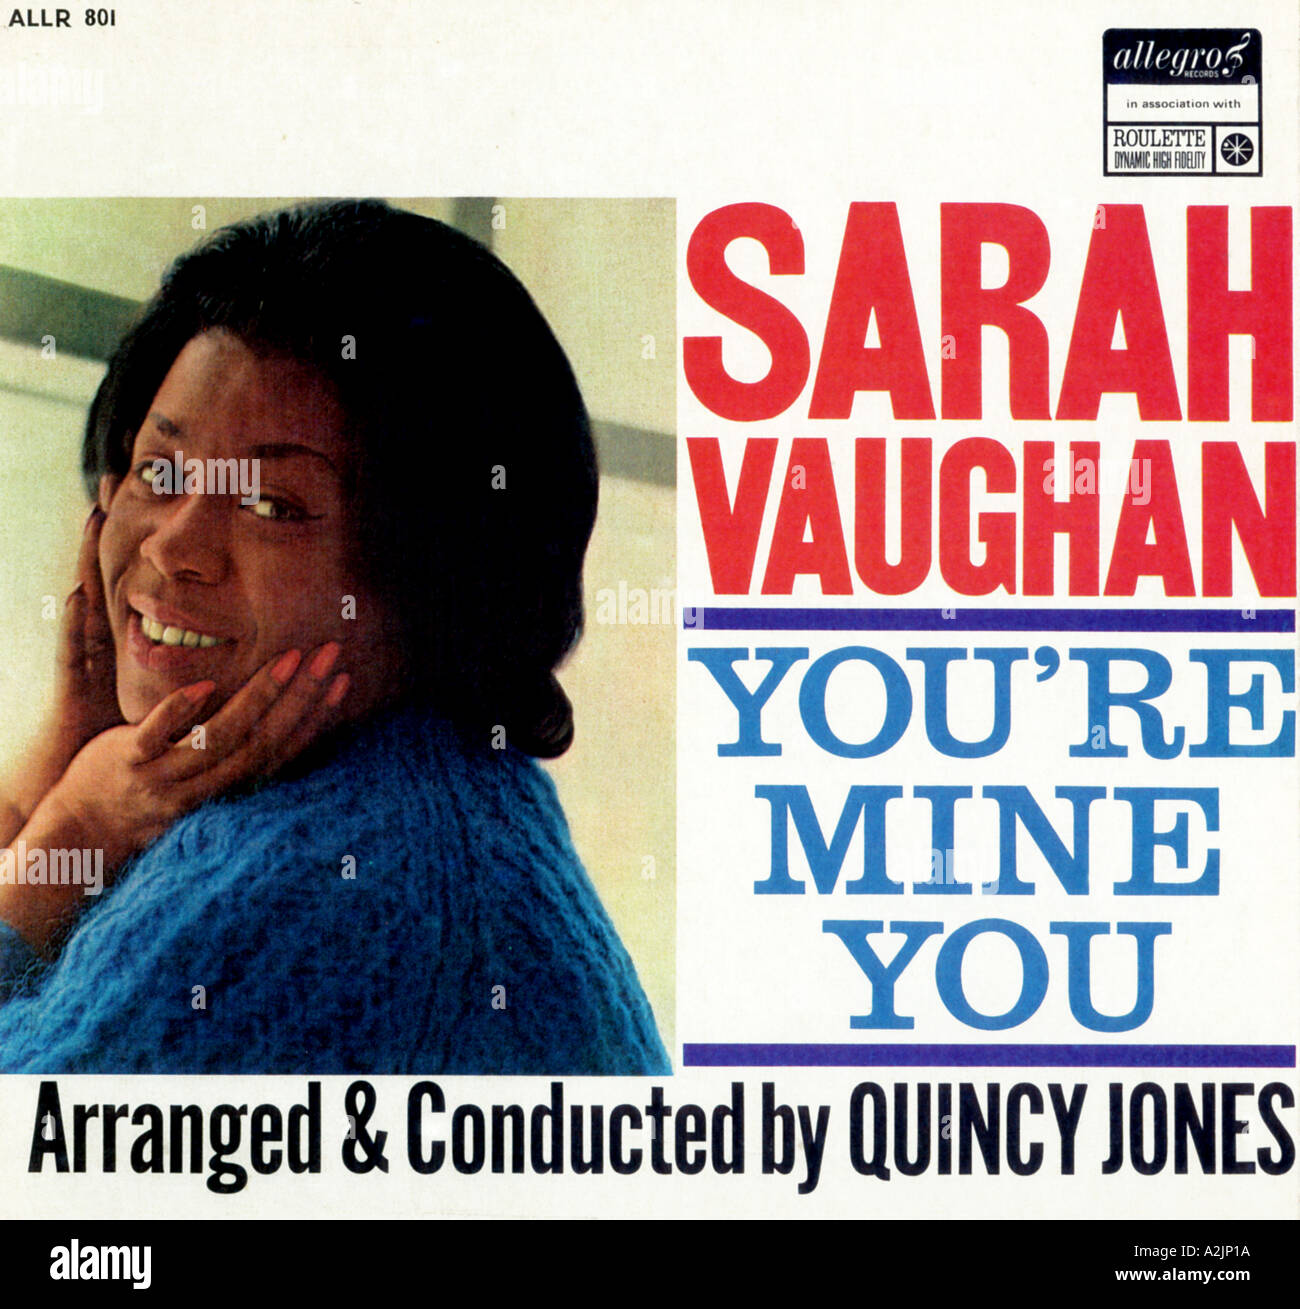 SARAH VAUGHAN cover of her album You re Mine You Stock Photo